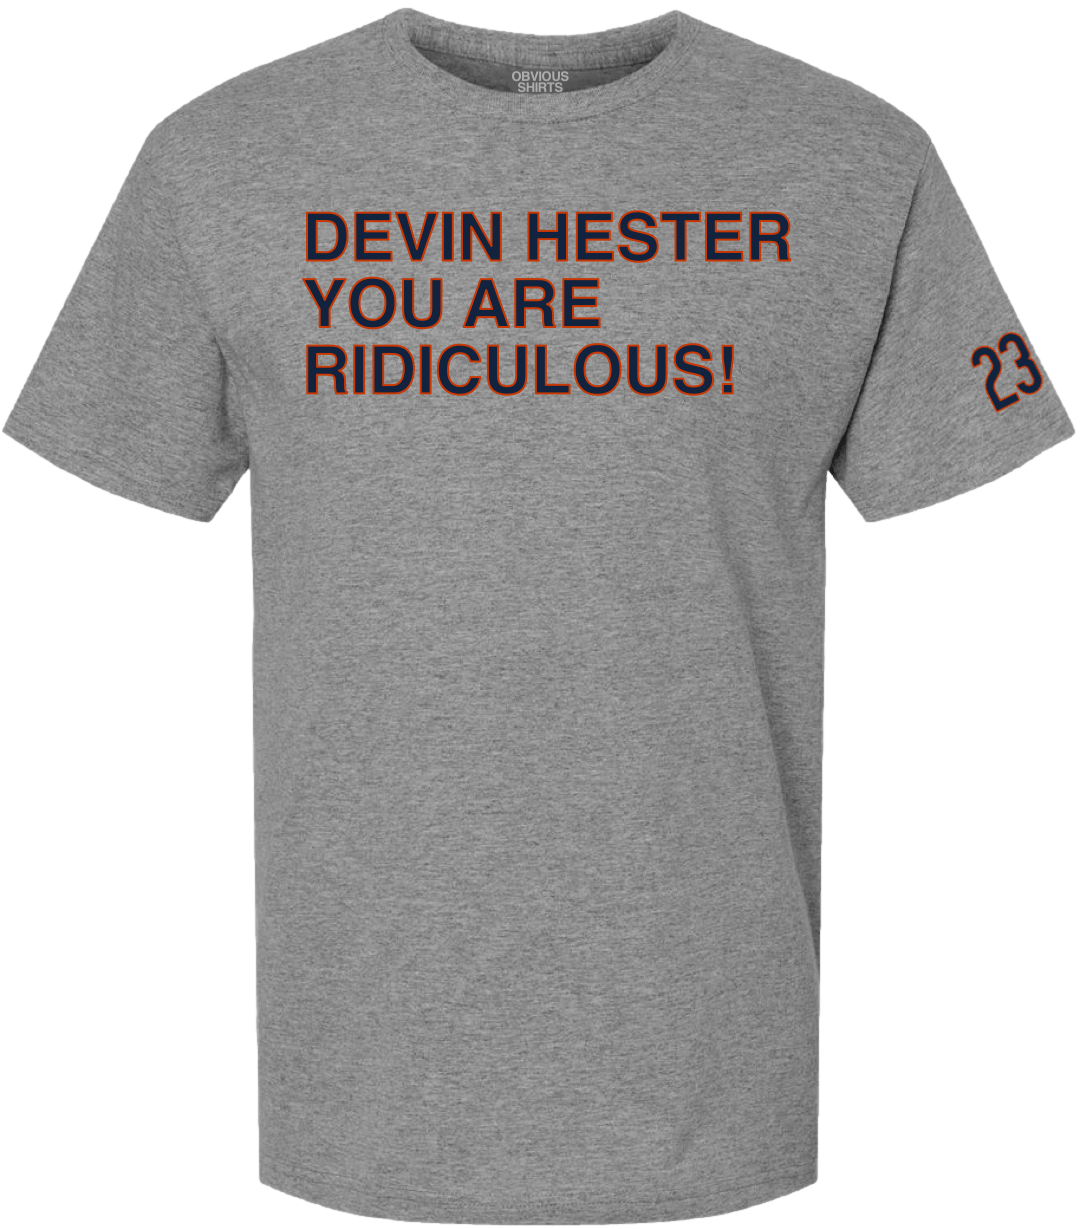 Devin Hester You Are Ridiculous Obvious Shirts 7372